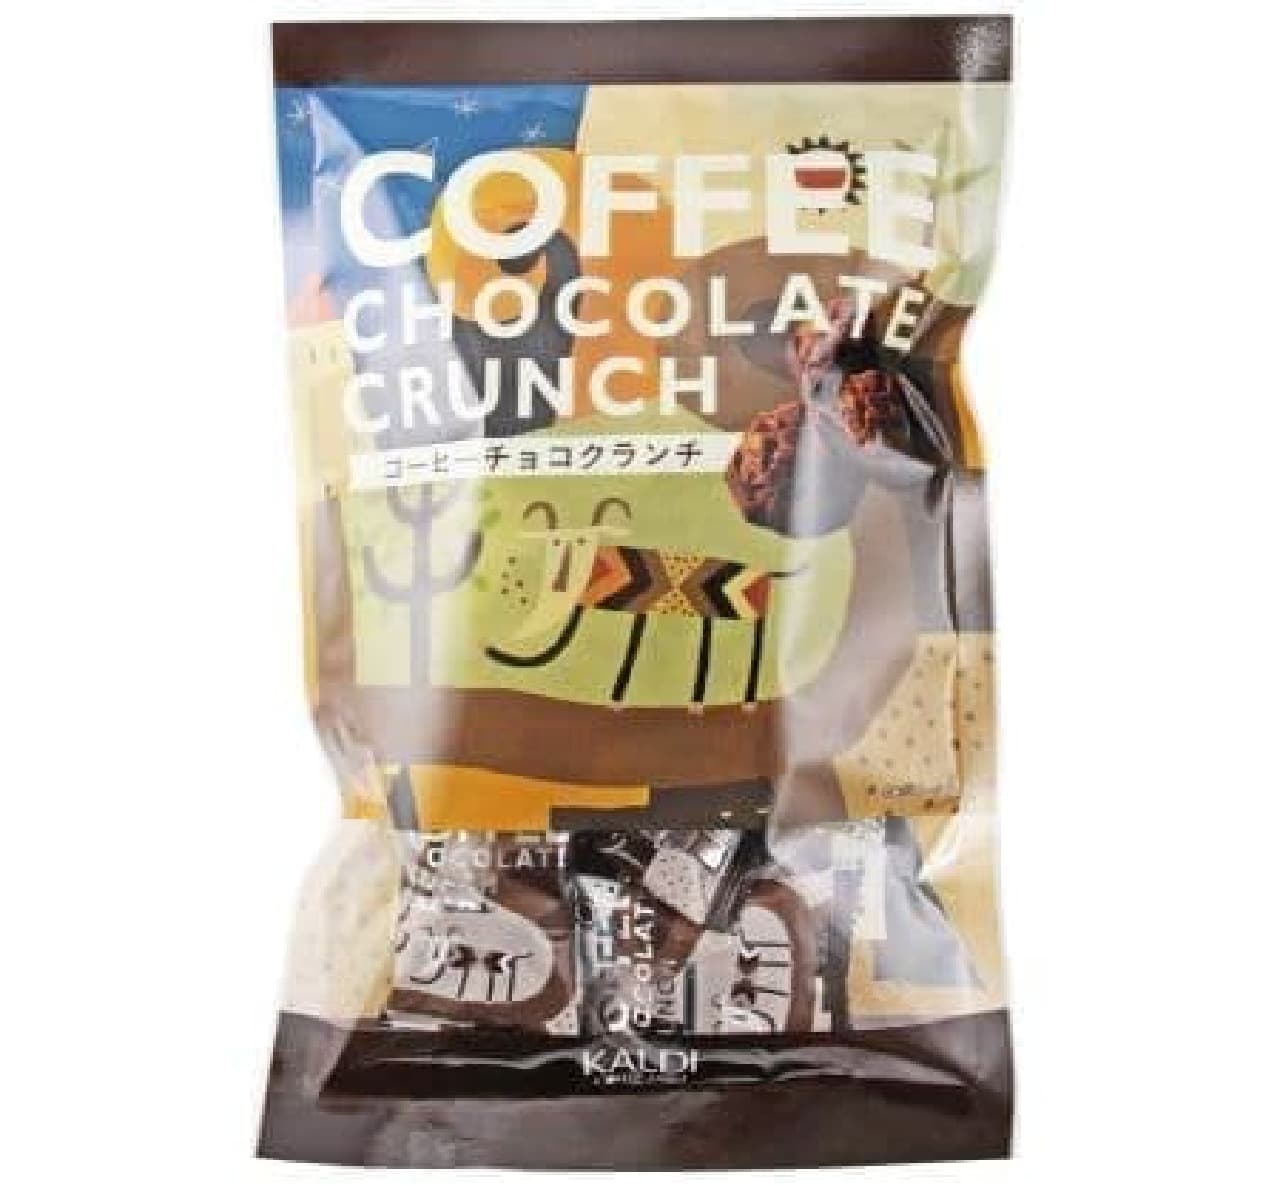 The original coffee chocolate crunch is a crunch chocolate mixed with "mild KALDI"